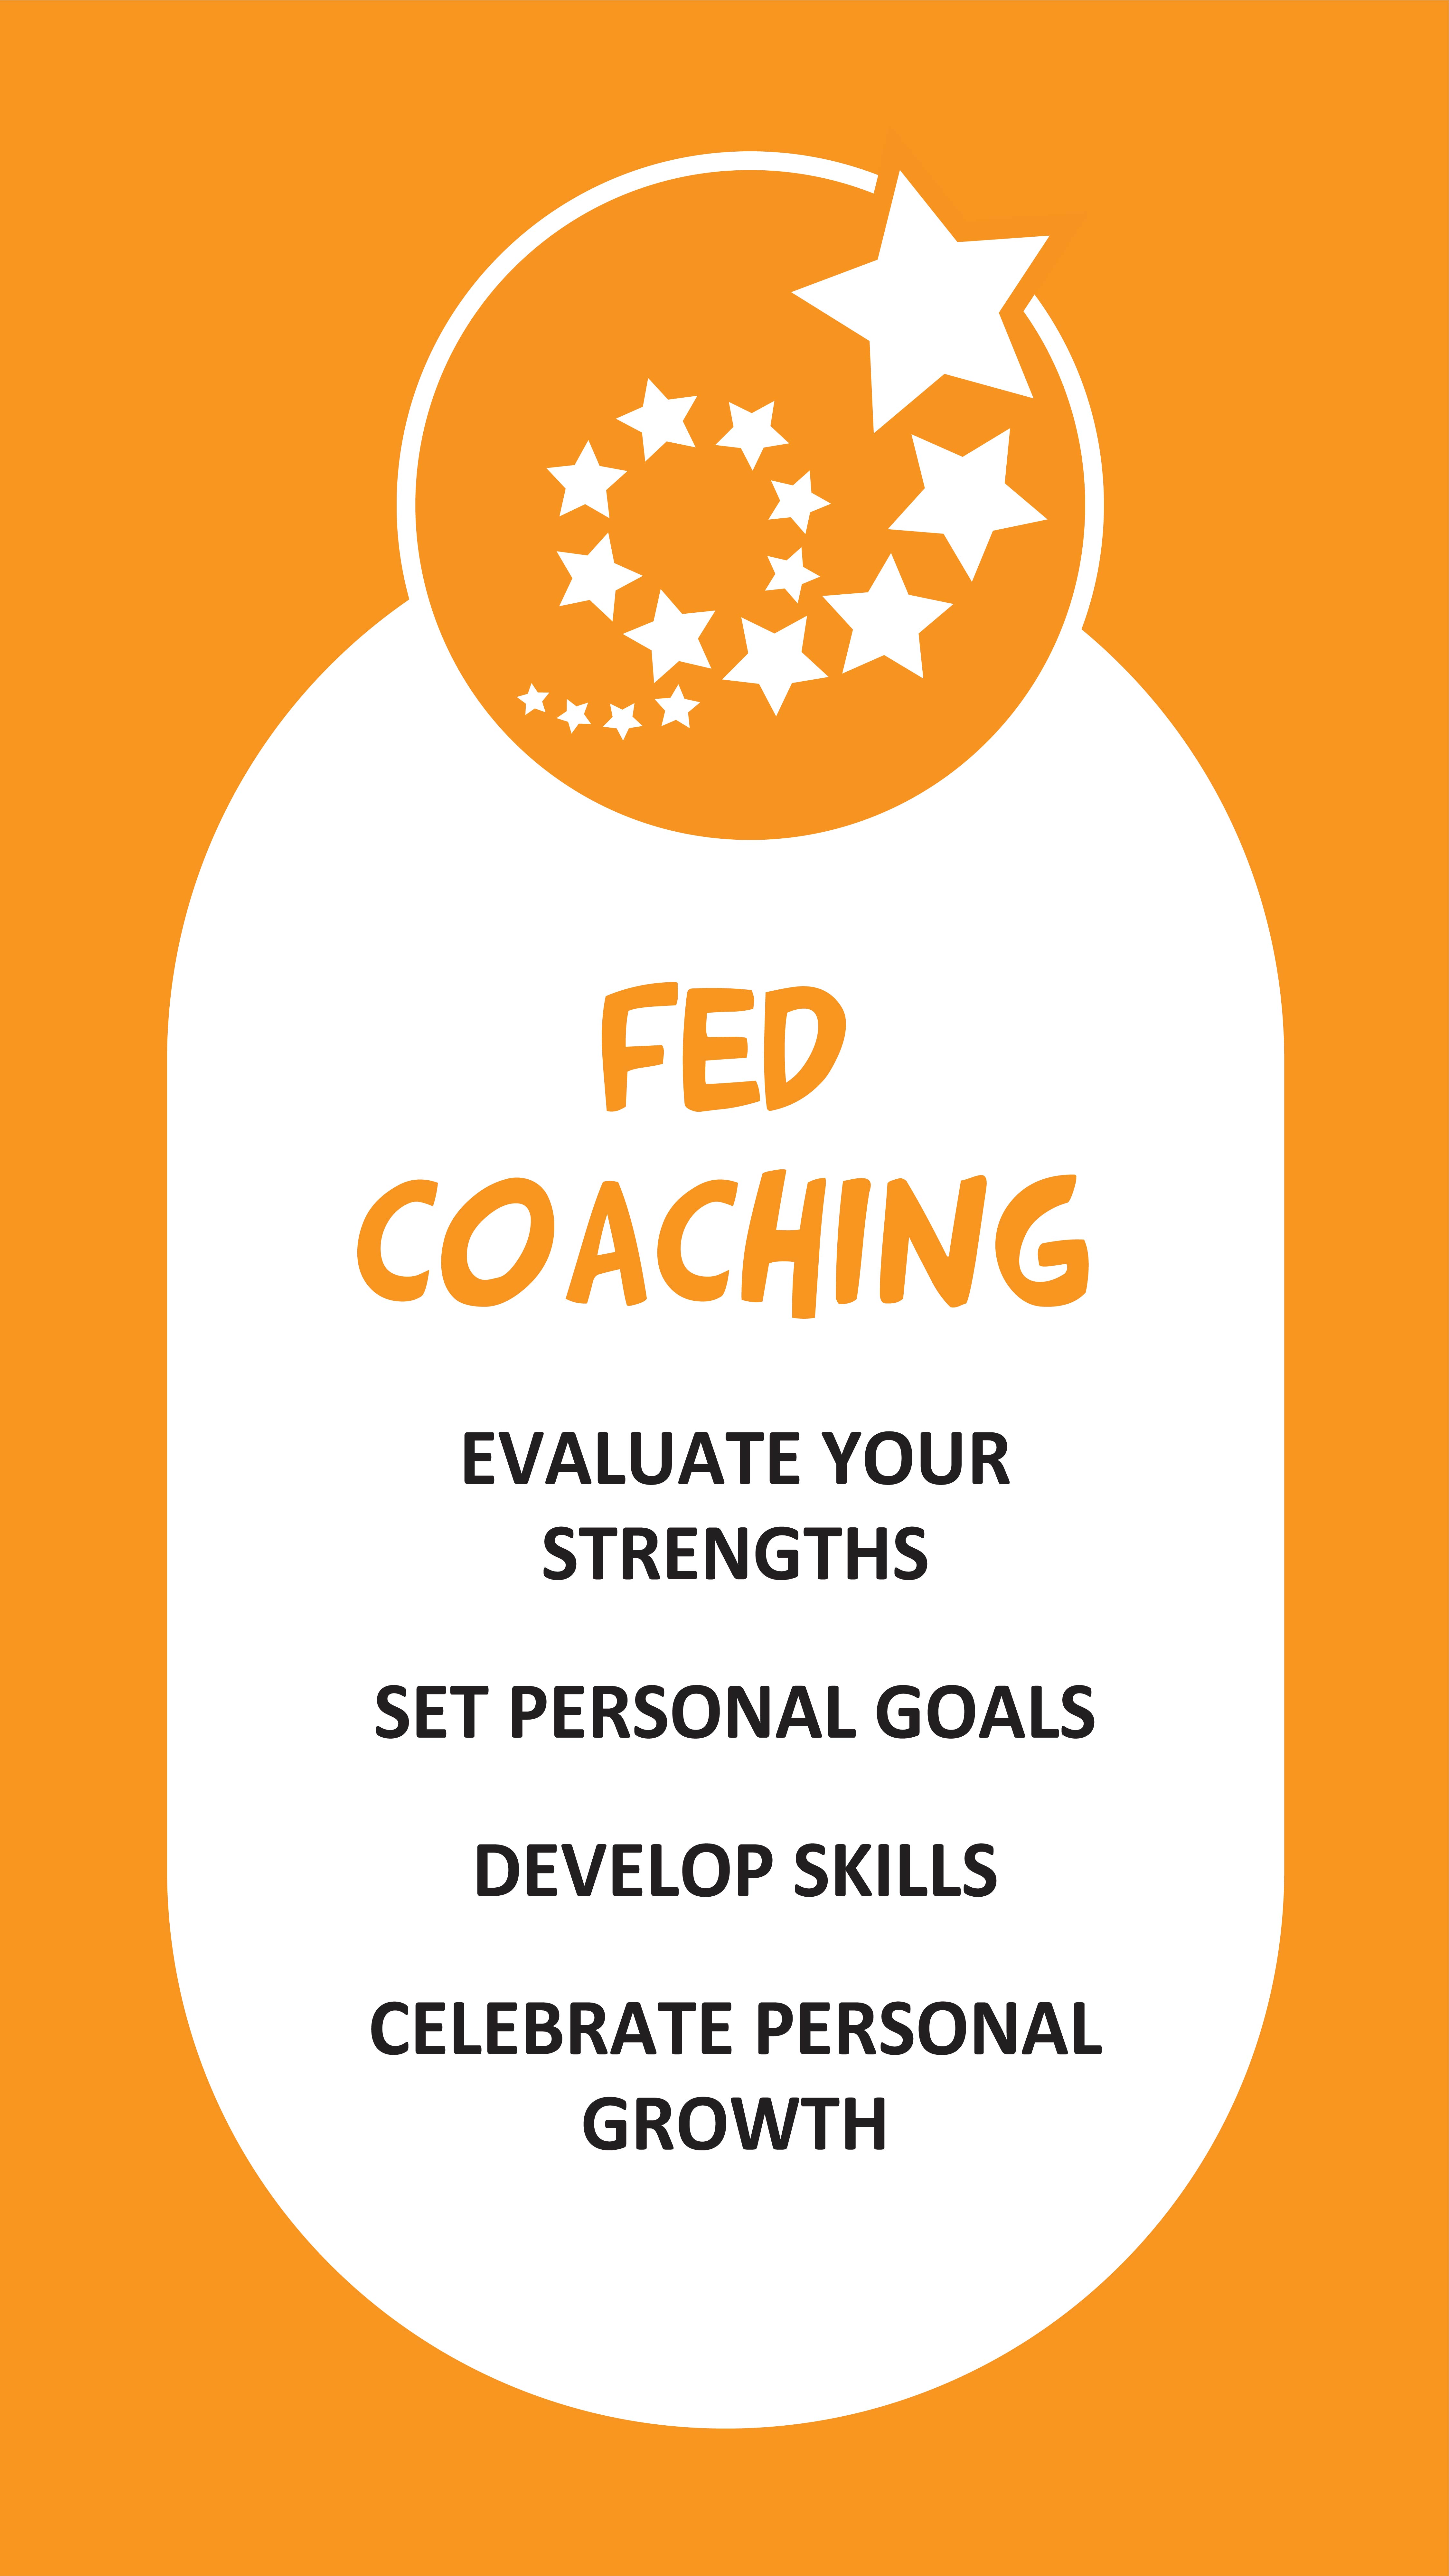 Fed Coaching: Evaluate your strengths, Set personal goals, Develop skills, Celebrate personal growth.